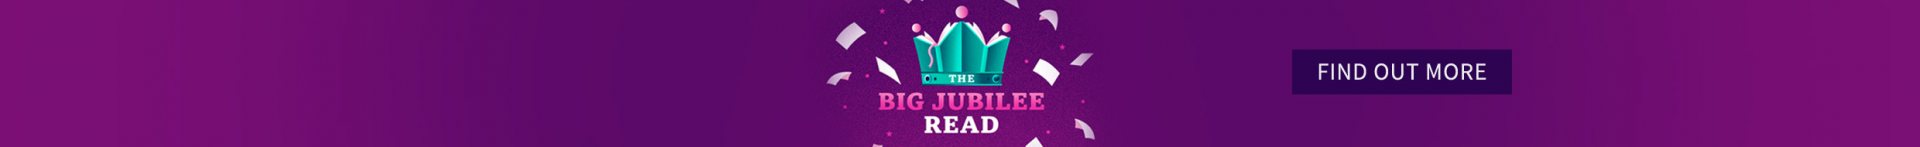 The Big Jubilee Read | Find Out More